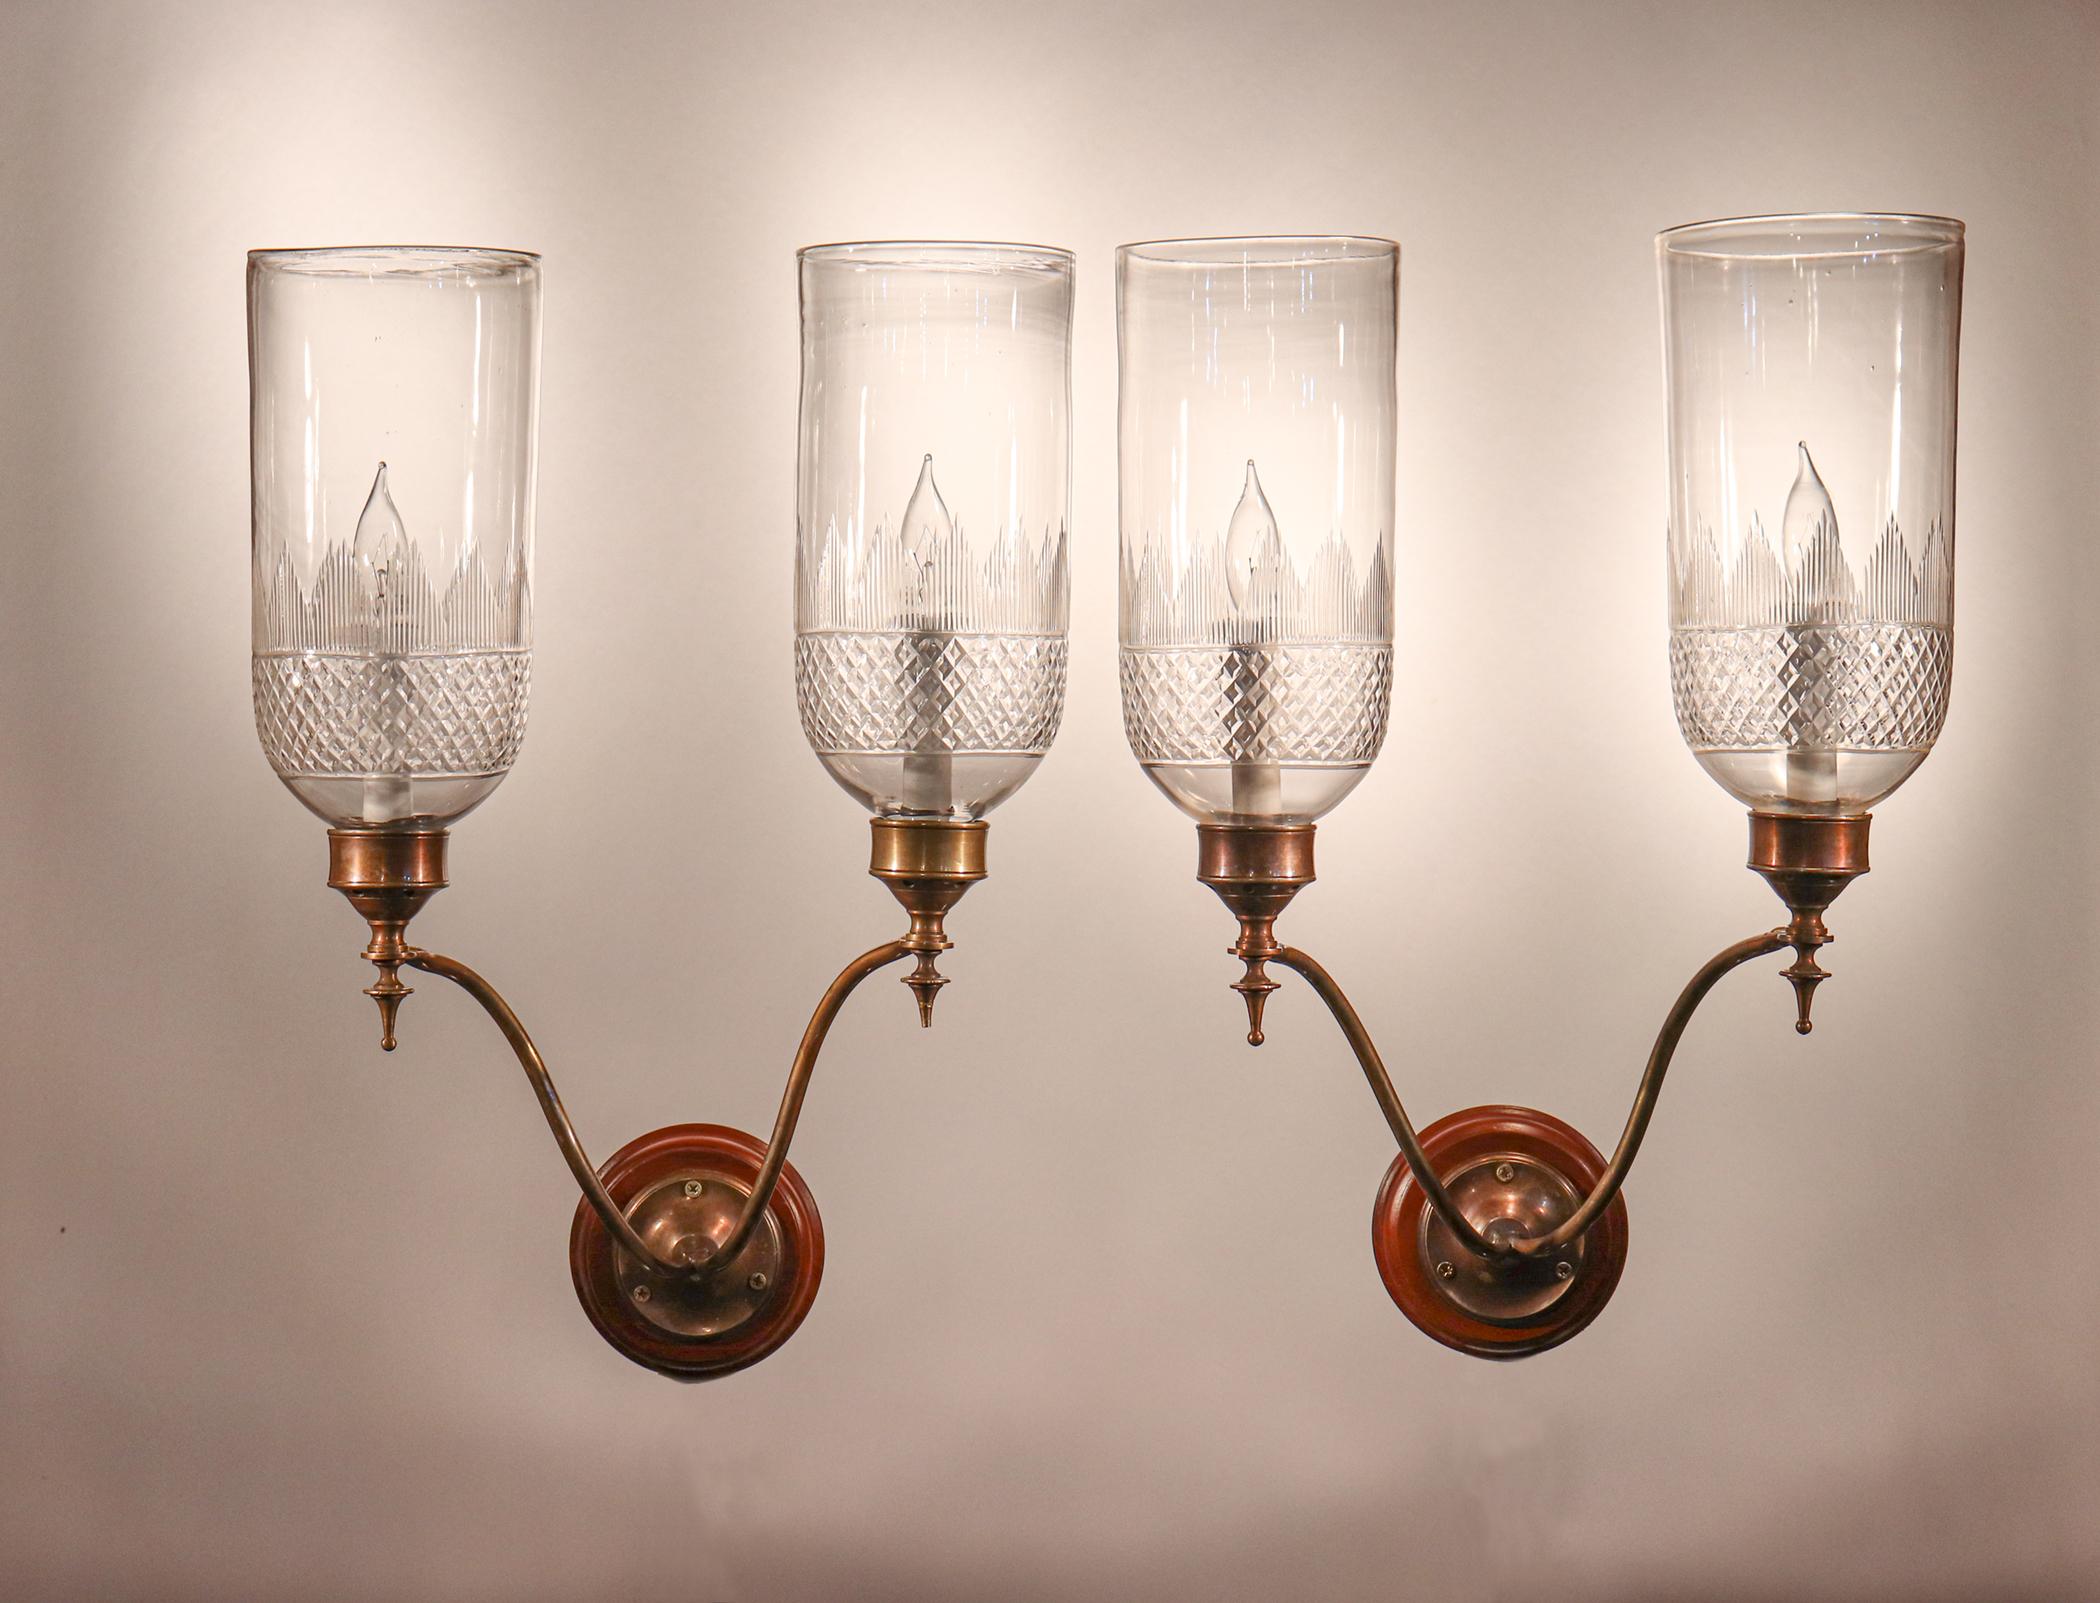 A rare set of four Classic English hurricane sconce shades with cut-glass etching at their bases. The quality of these circa 1900 shades is very good, with several desirable air bubbles in the hand blown glass. The shades arrive ready to install